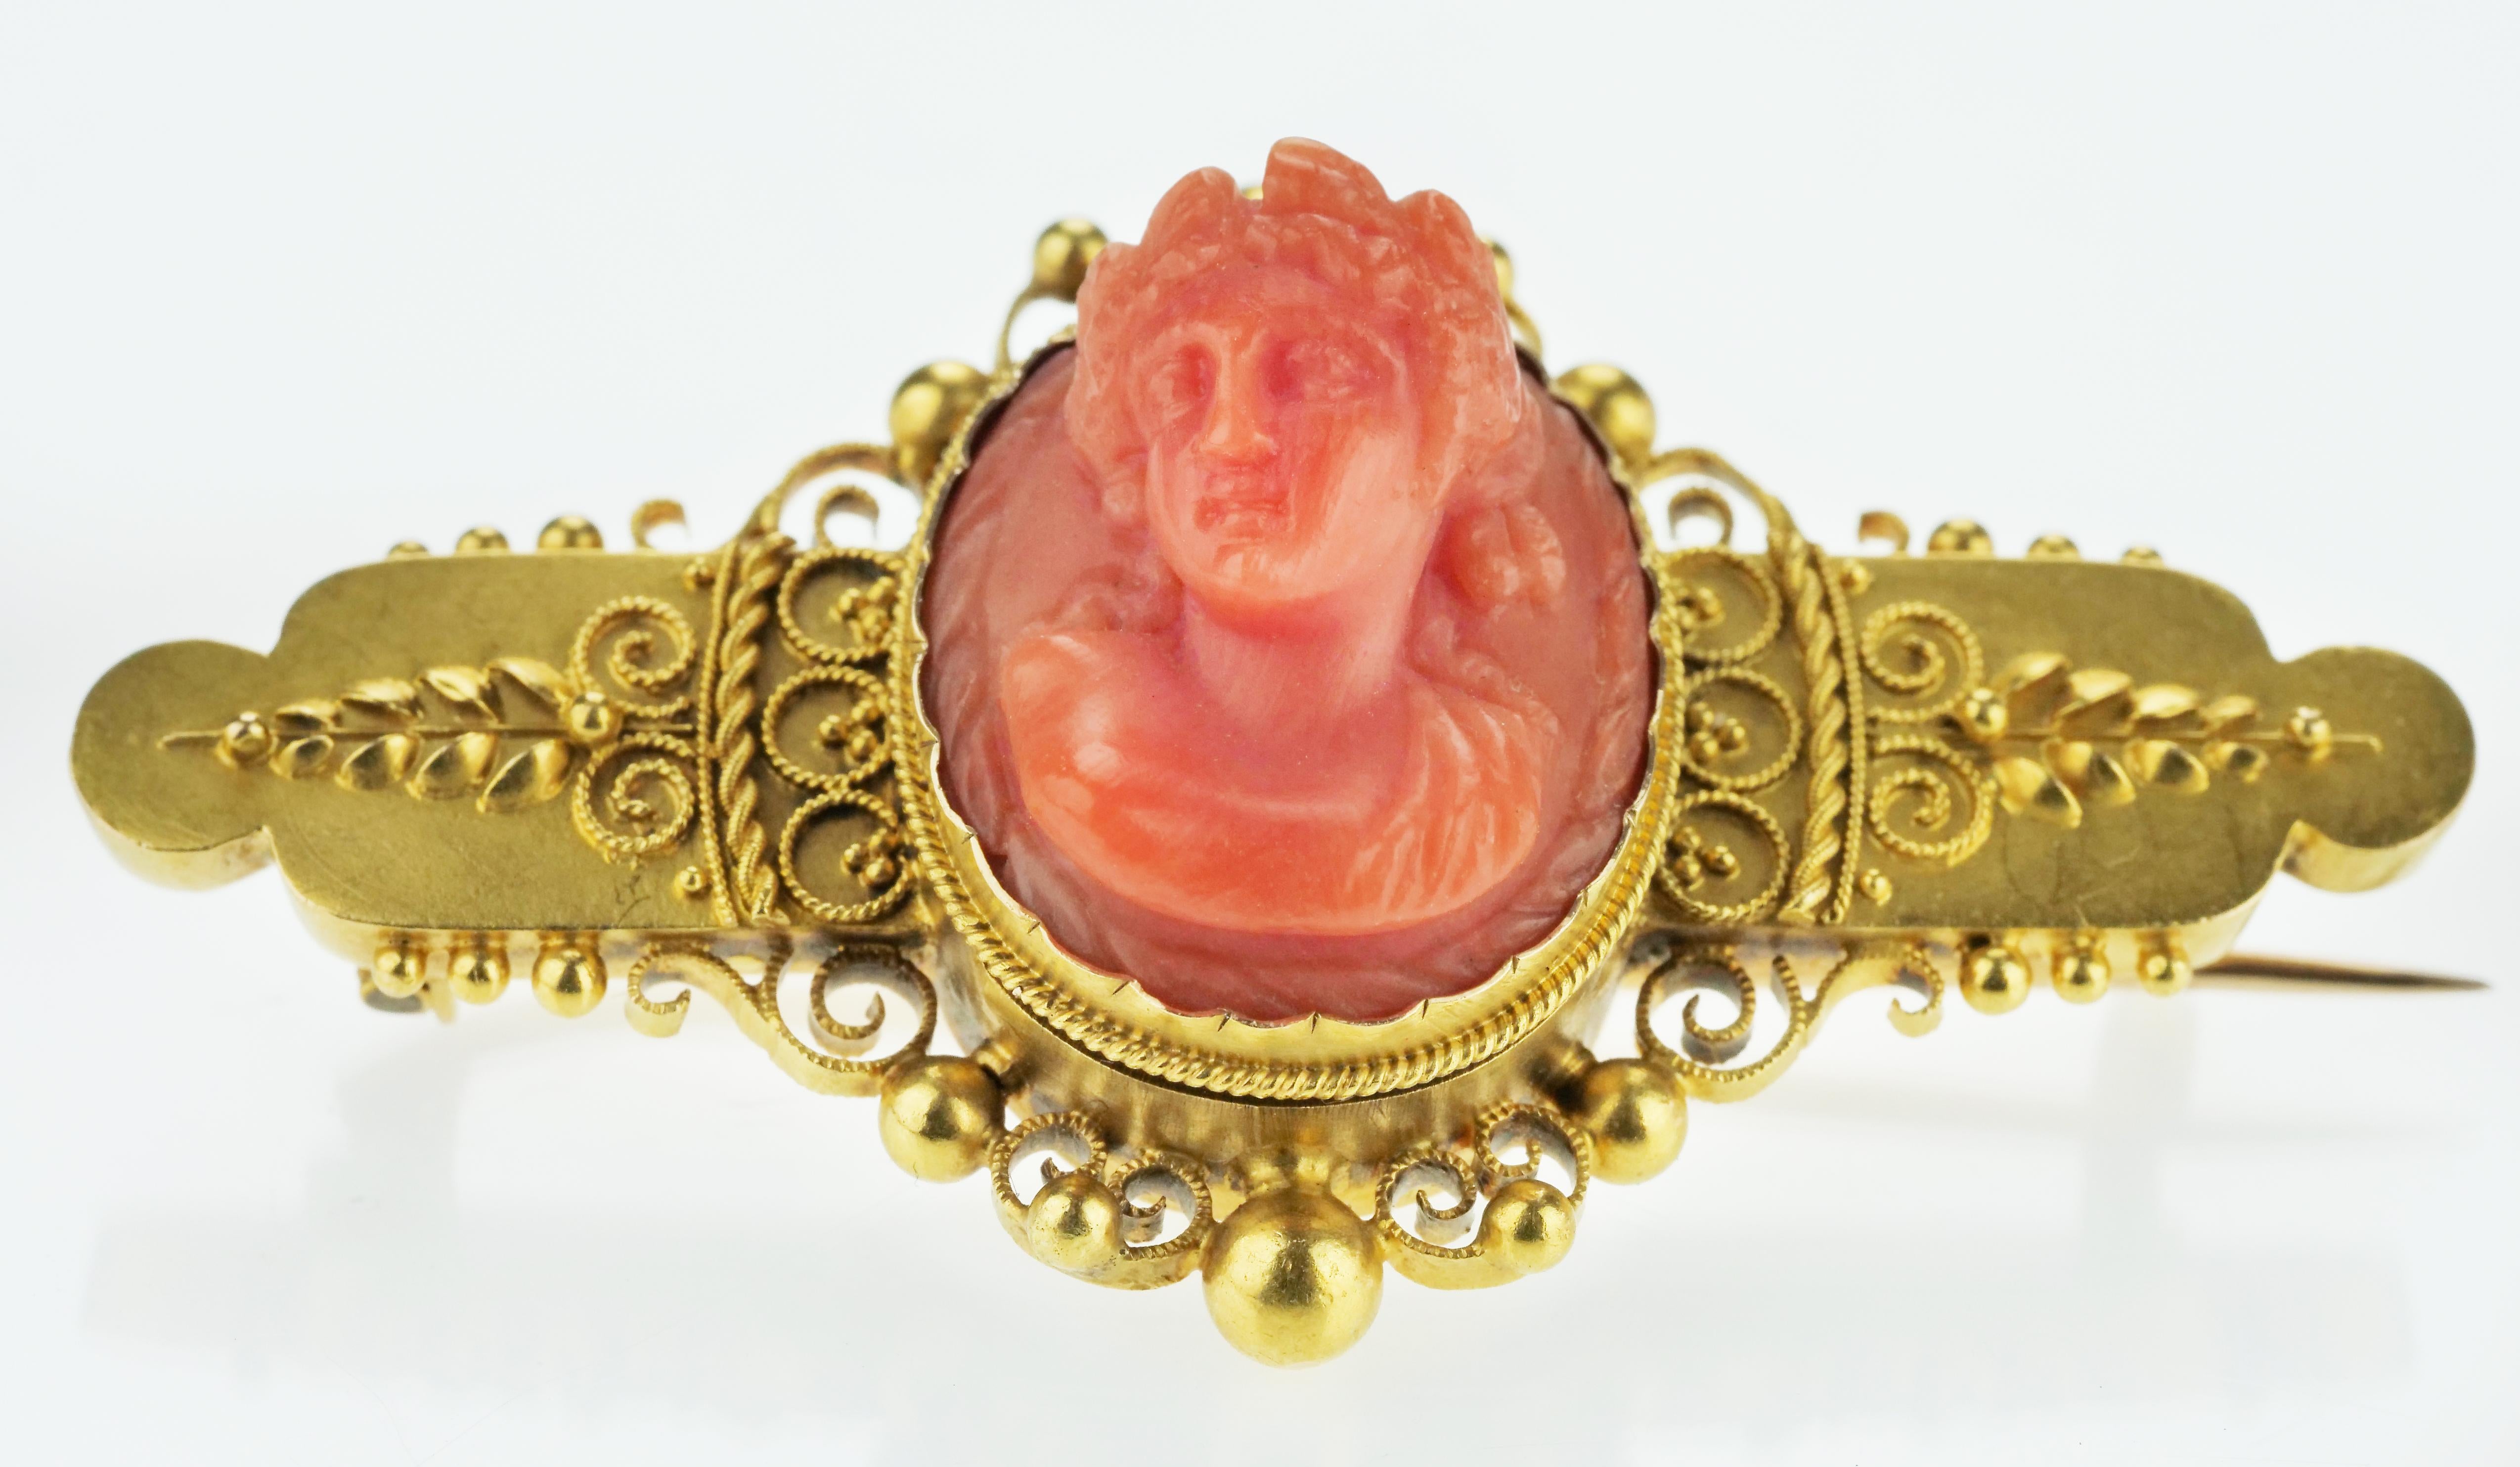 A Victorian 15 carat gold brooch with a finely carved coral cameo, a lovely example of the 19th century Etruscan revival movement. Hallmarked in Birmingham, England in 1896, this is an exceptional example of the craftsmanship which thrived in the